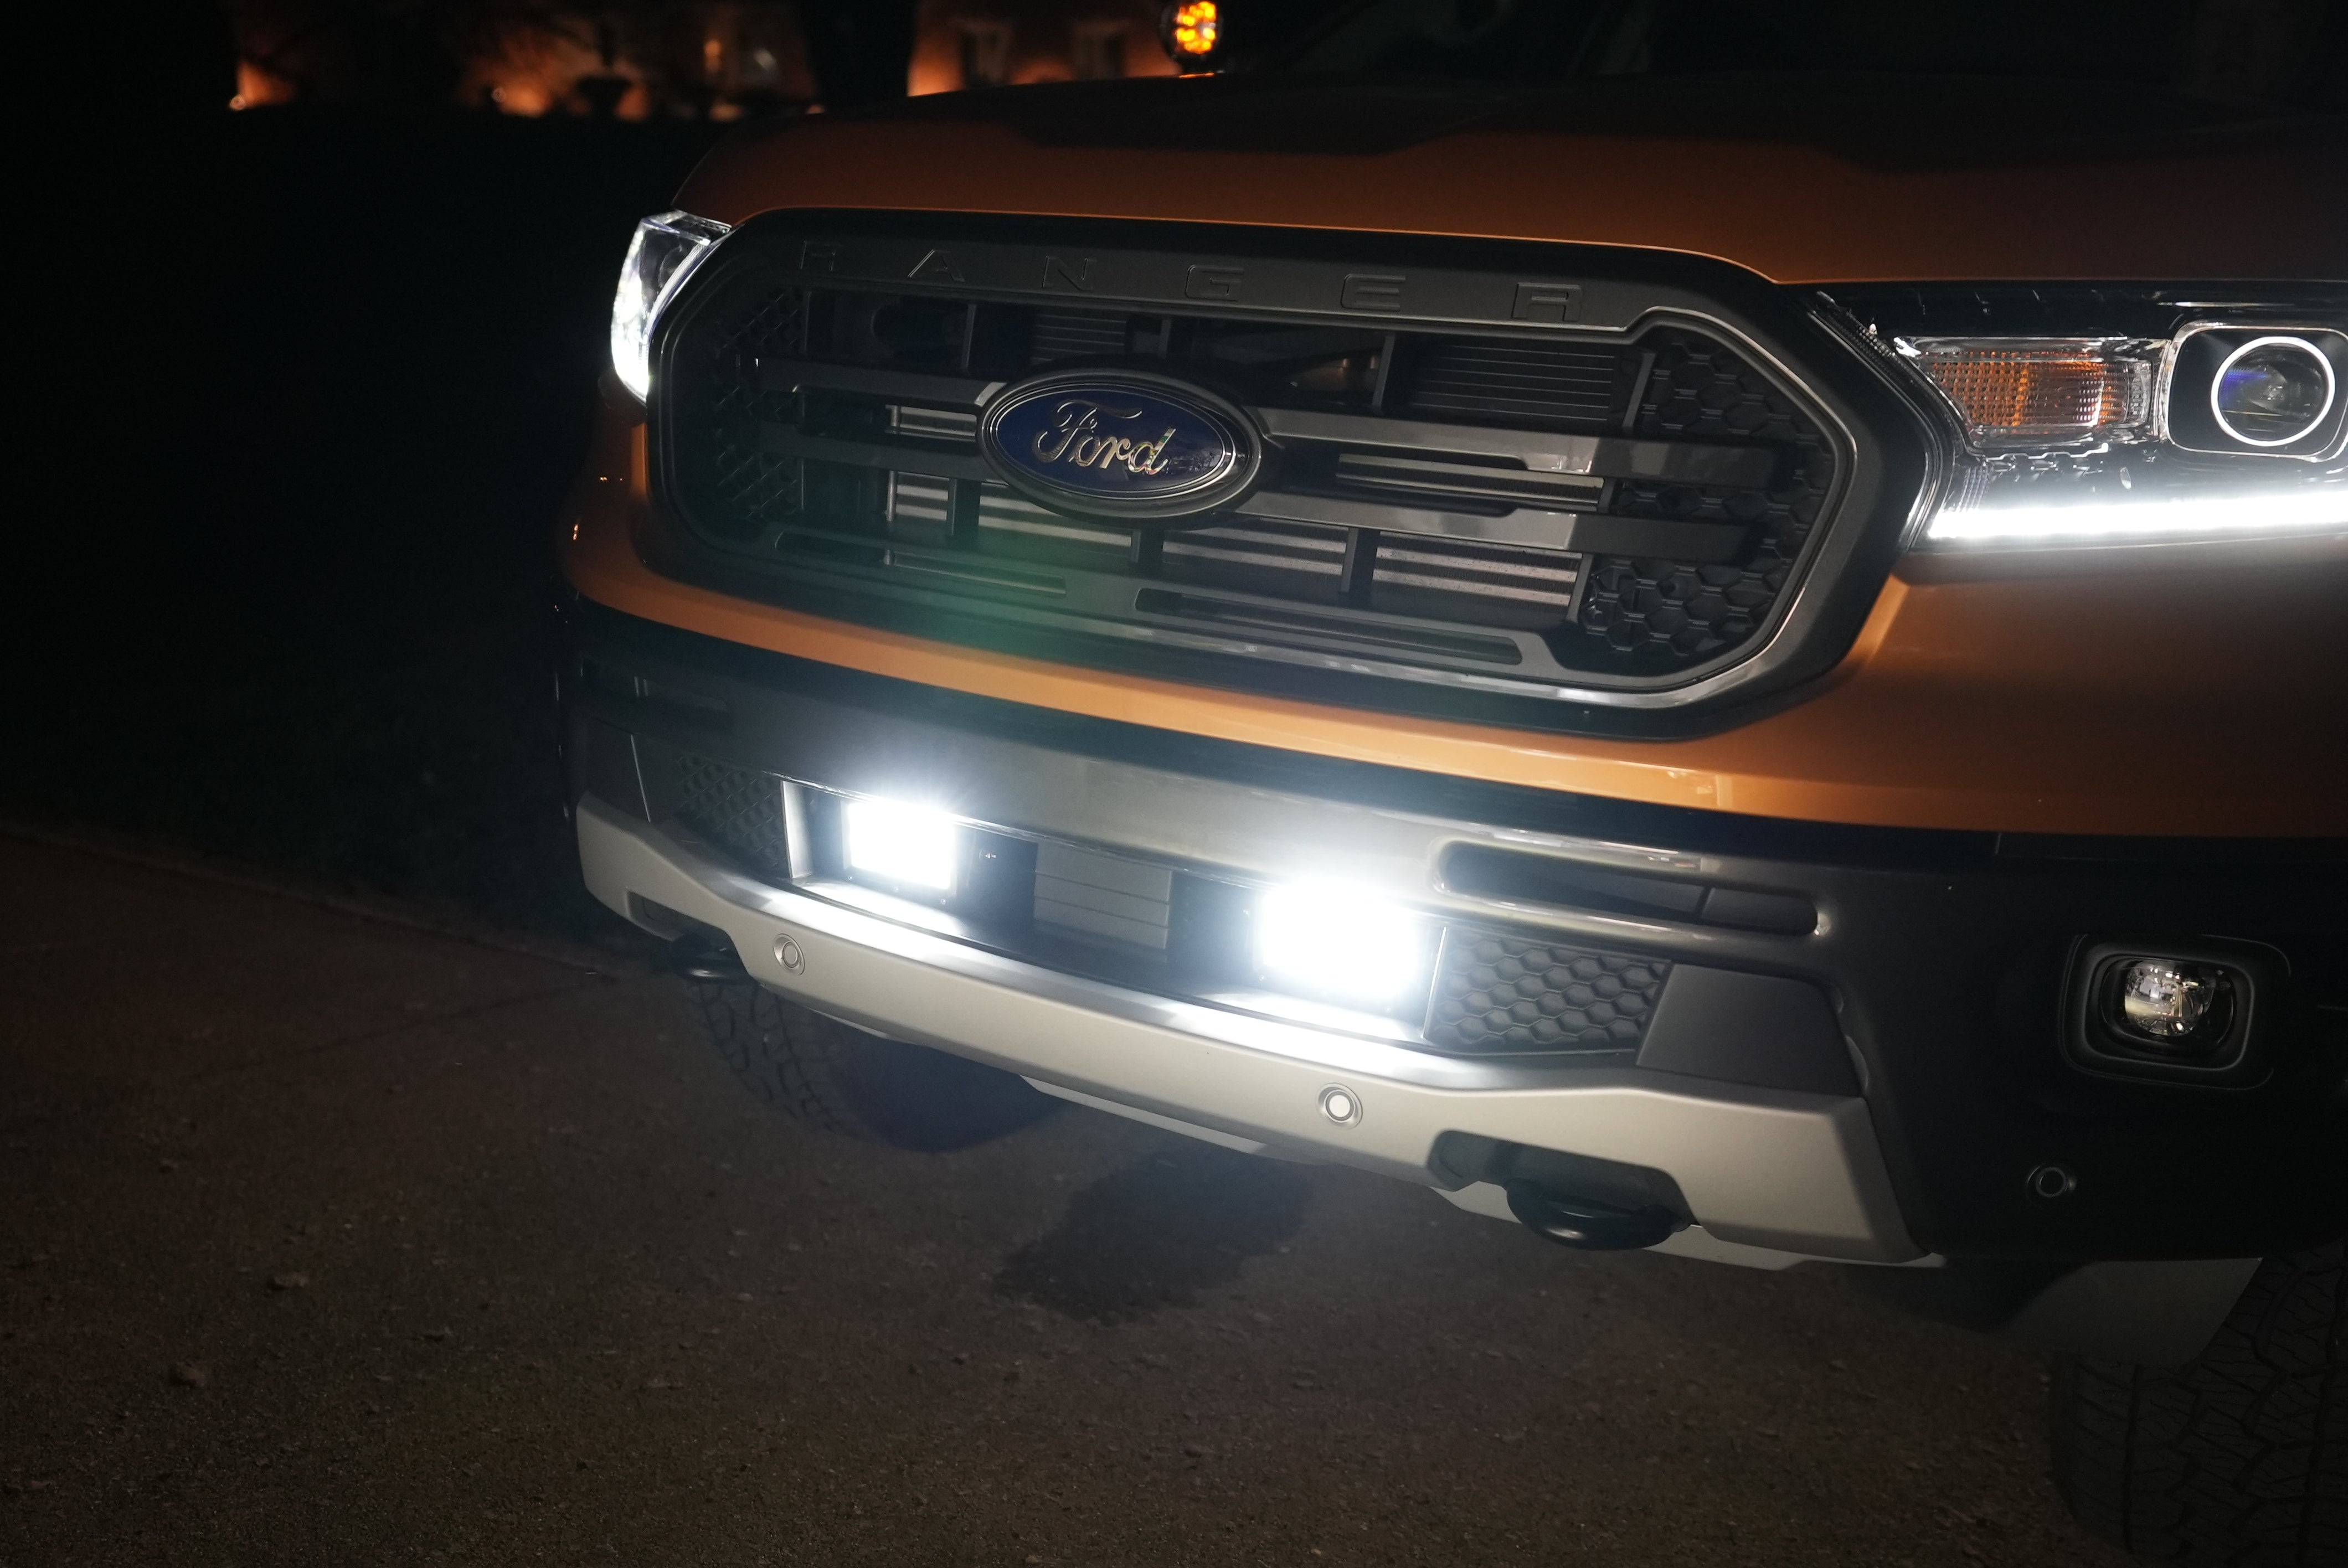 SPV Parts 2019-2022 Ford Ranger Lower Bumper Grille Light Kit Rigid Pro E4-Series With No Drill Mounts